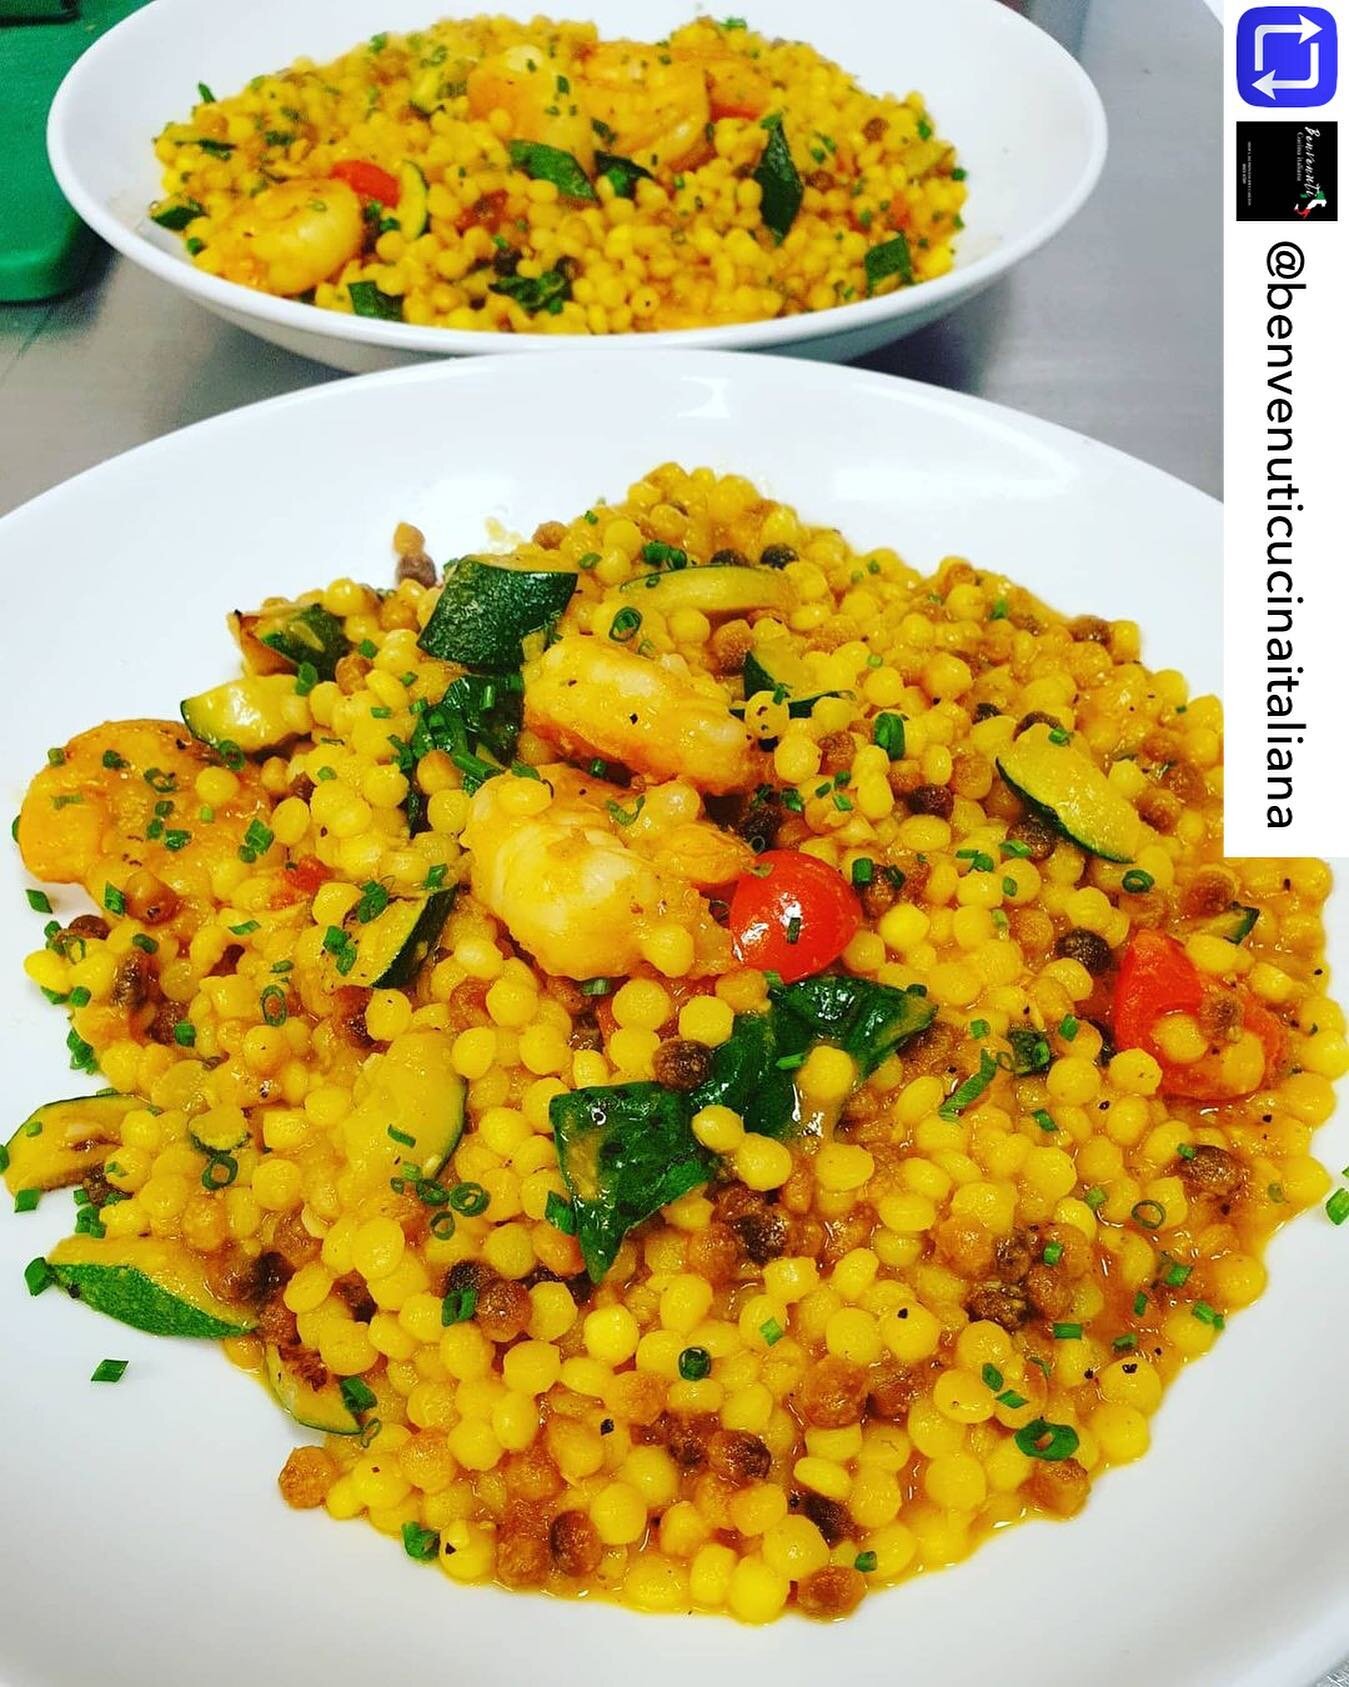 Perfect comfort food! #fregola from @lacasadelgrano #proudsupplier Repost from @benvenuticucinaitaliana using repost_now_app - No its not lentils 🤣 This is a Sardinian type of pasta called &quot;Fregola&quot;🍝
&quot;Fregola Sarda&quot;Typical Sardi